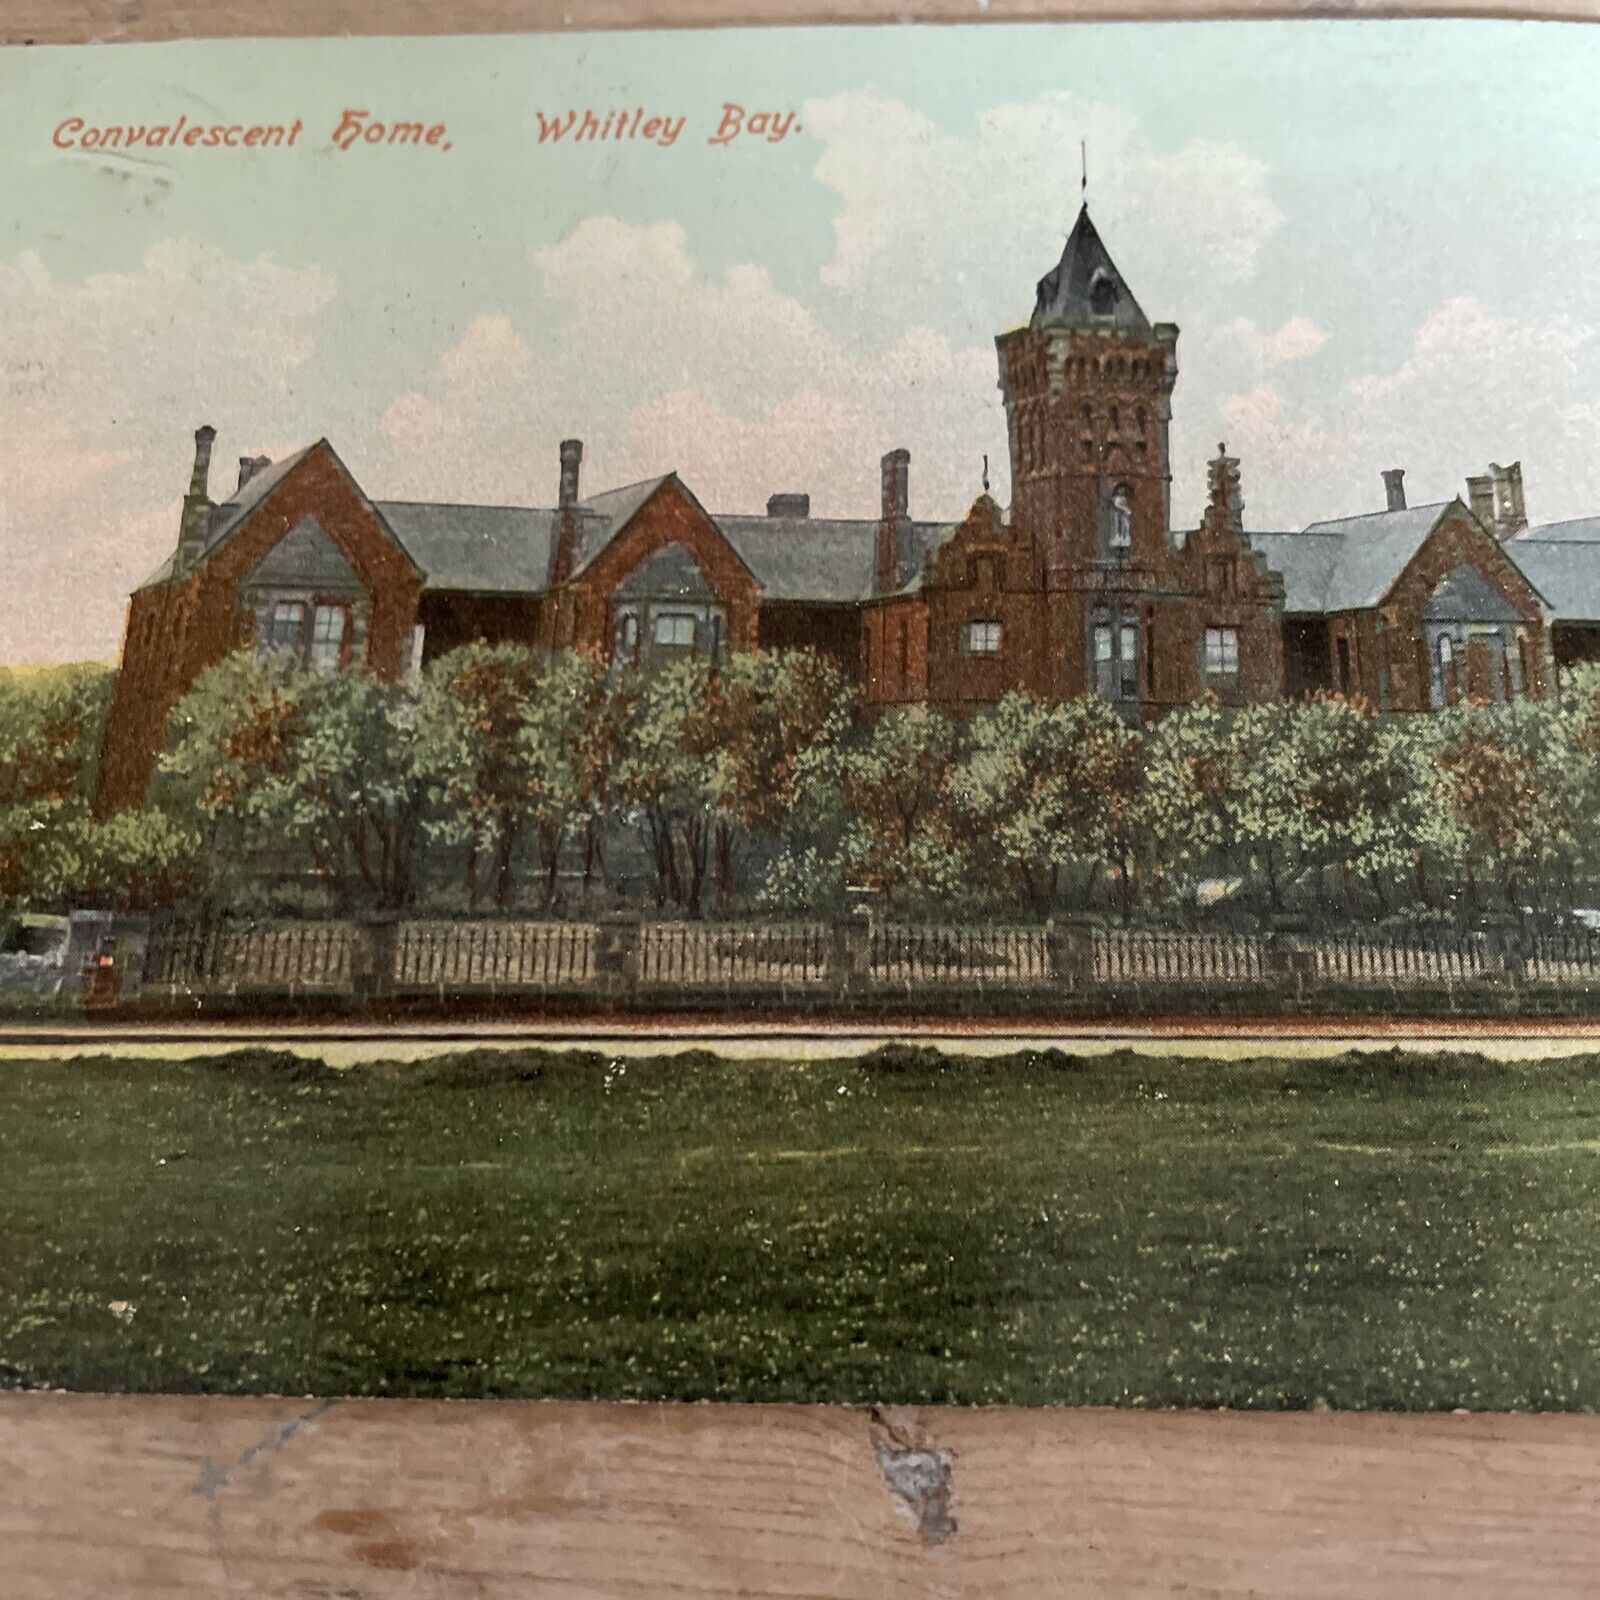 House Clearance - Old Service Of Convalescent Home Whitley Bay  Posted c1906. Good Condition.